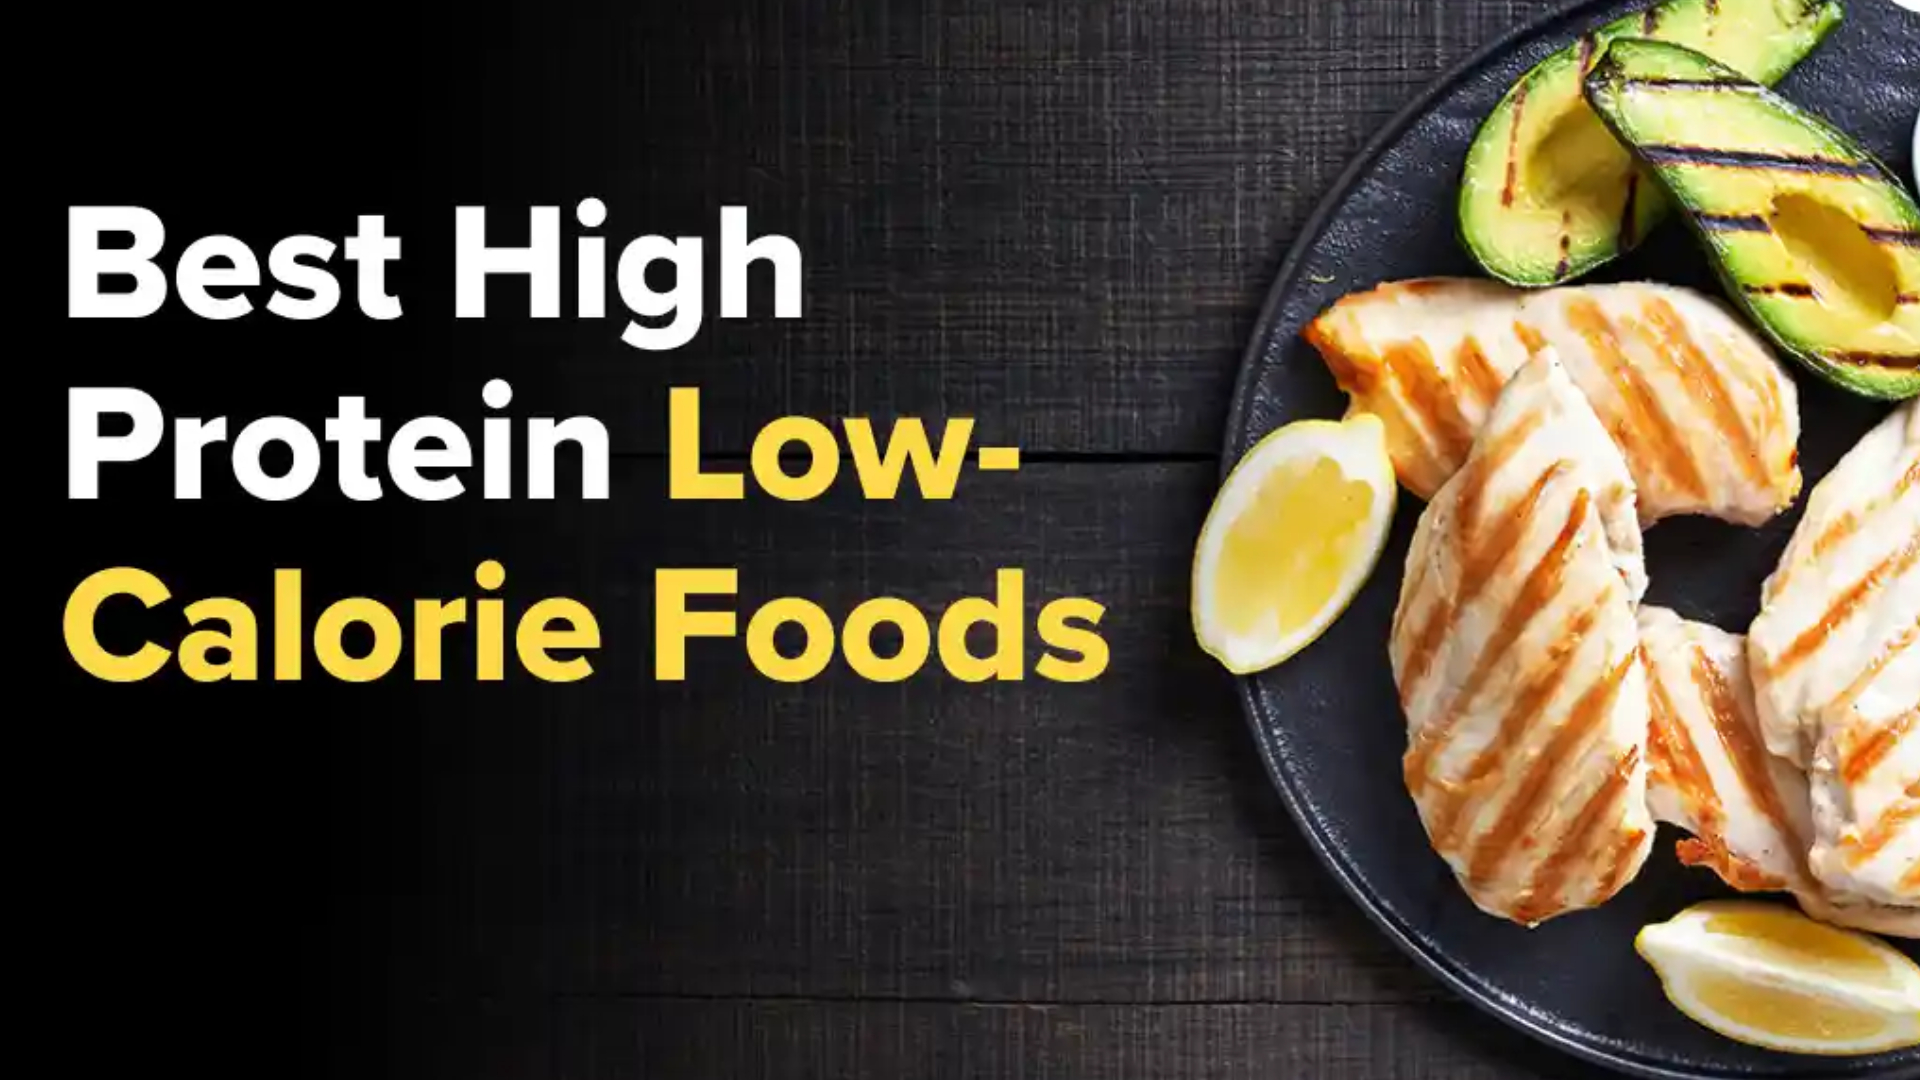 10 Best High-Protein, Low-Calorie Foods for Weight Loss